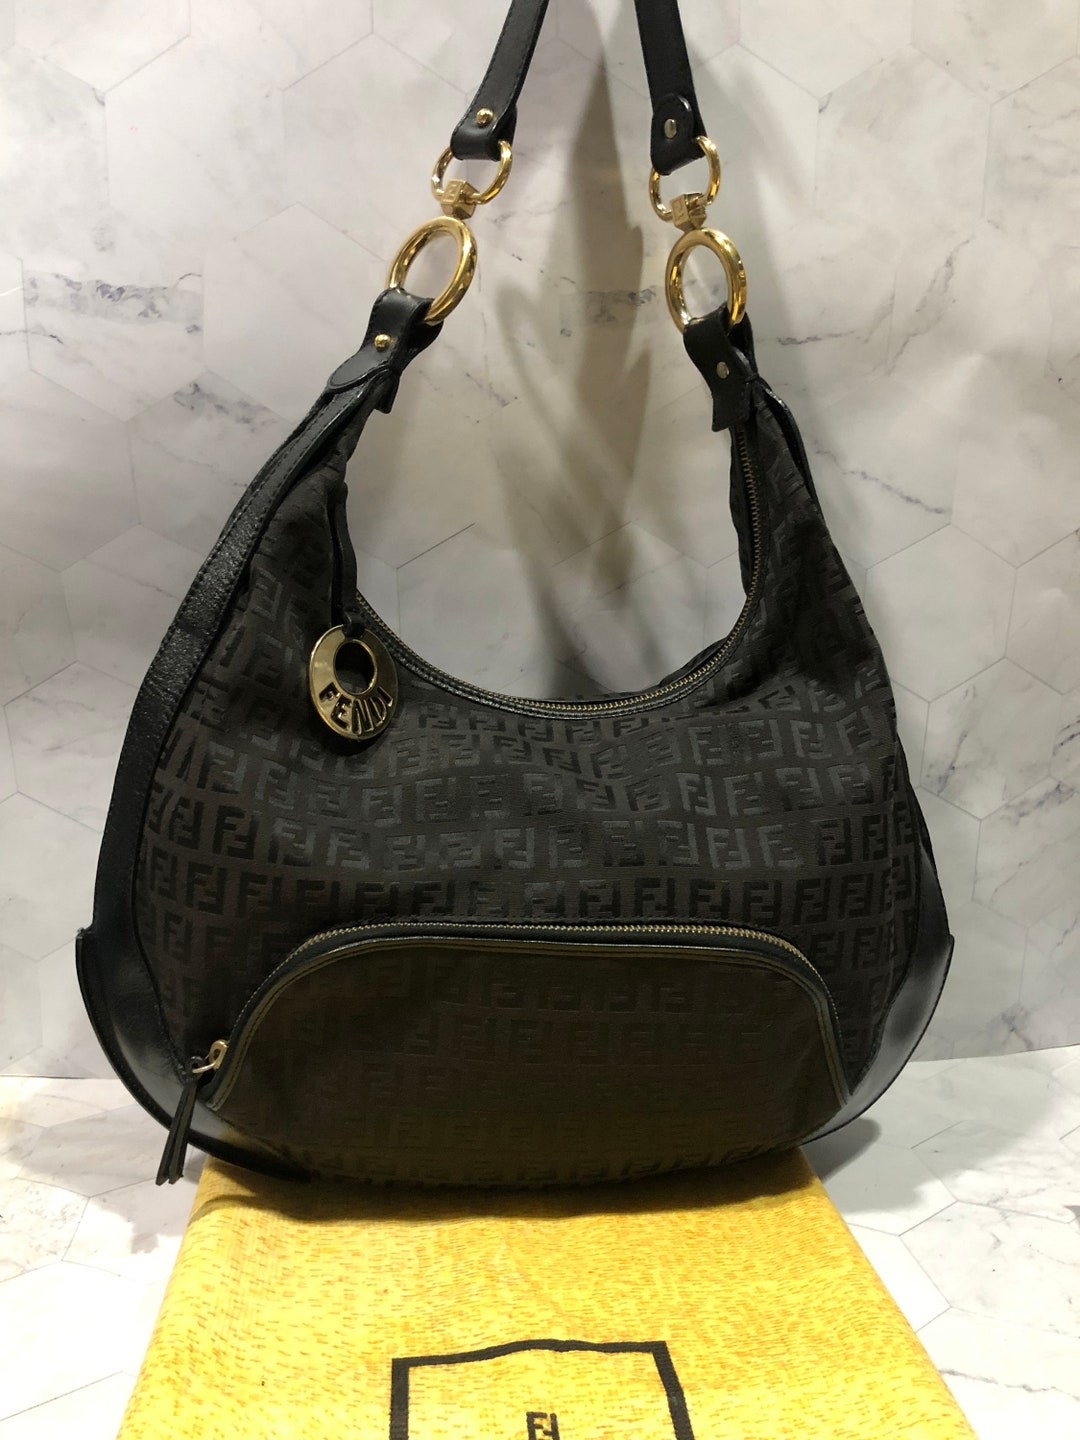 FENDI Kan I Embossed Leather Shoulder Bag - Excellent Condition & Authentic